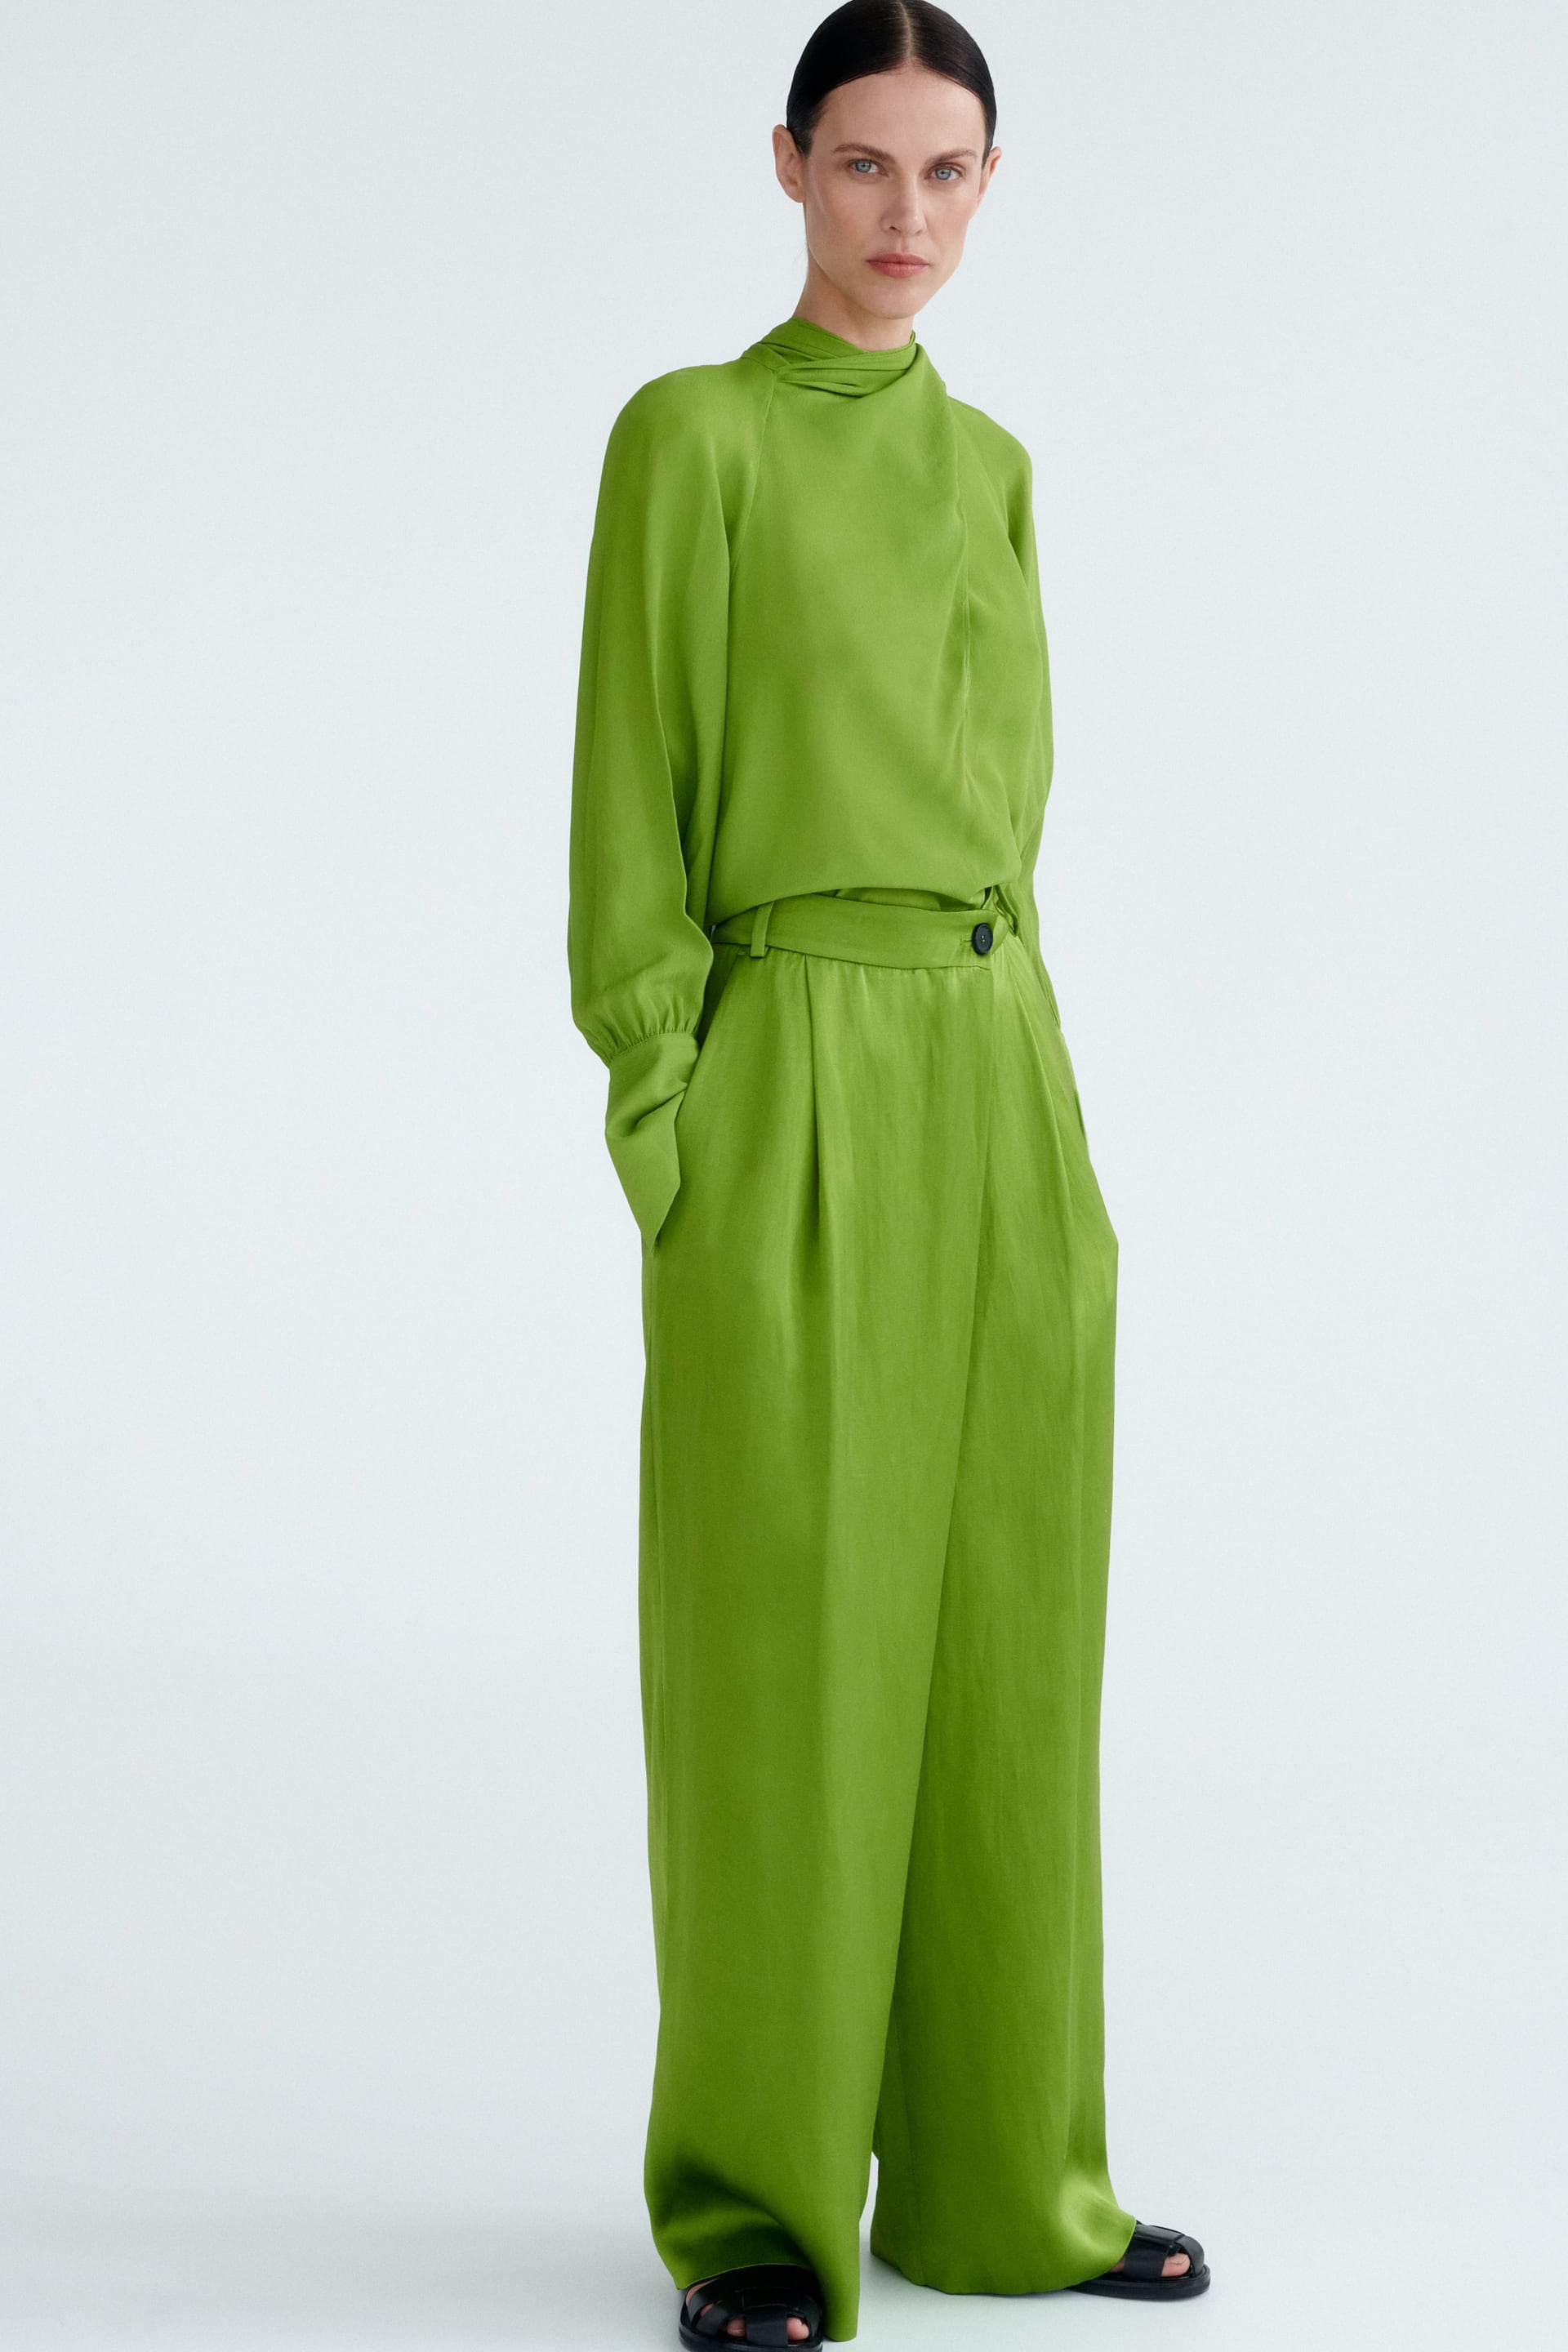 Zara's Summer Collection Is Here—36 ...